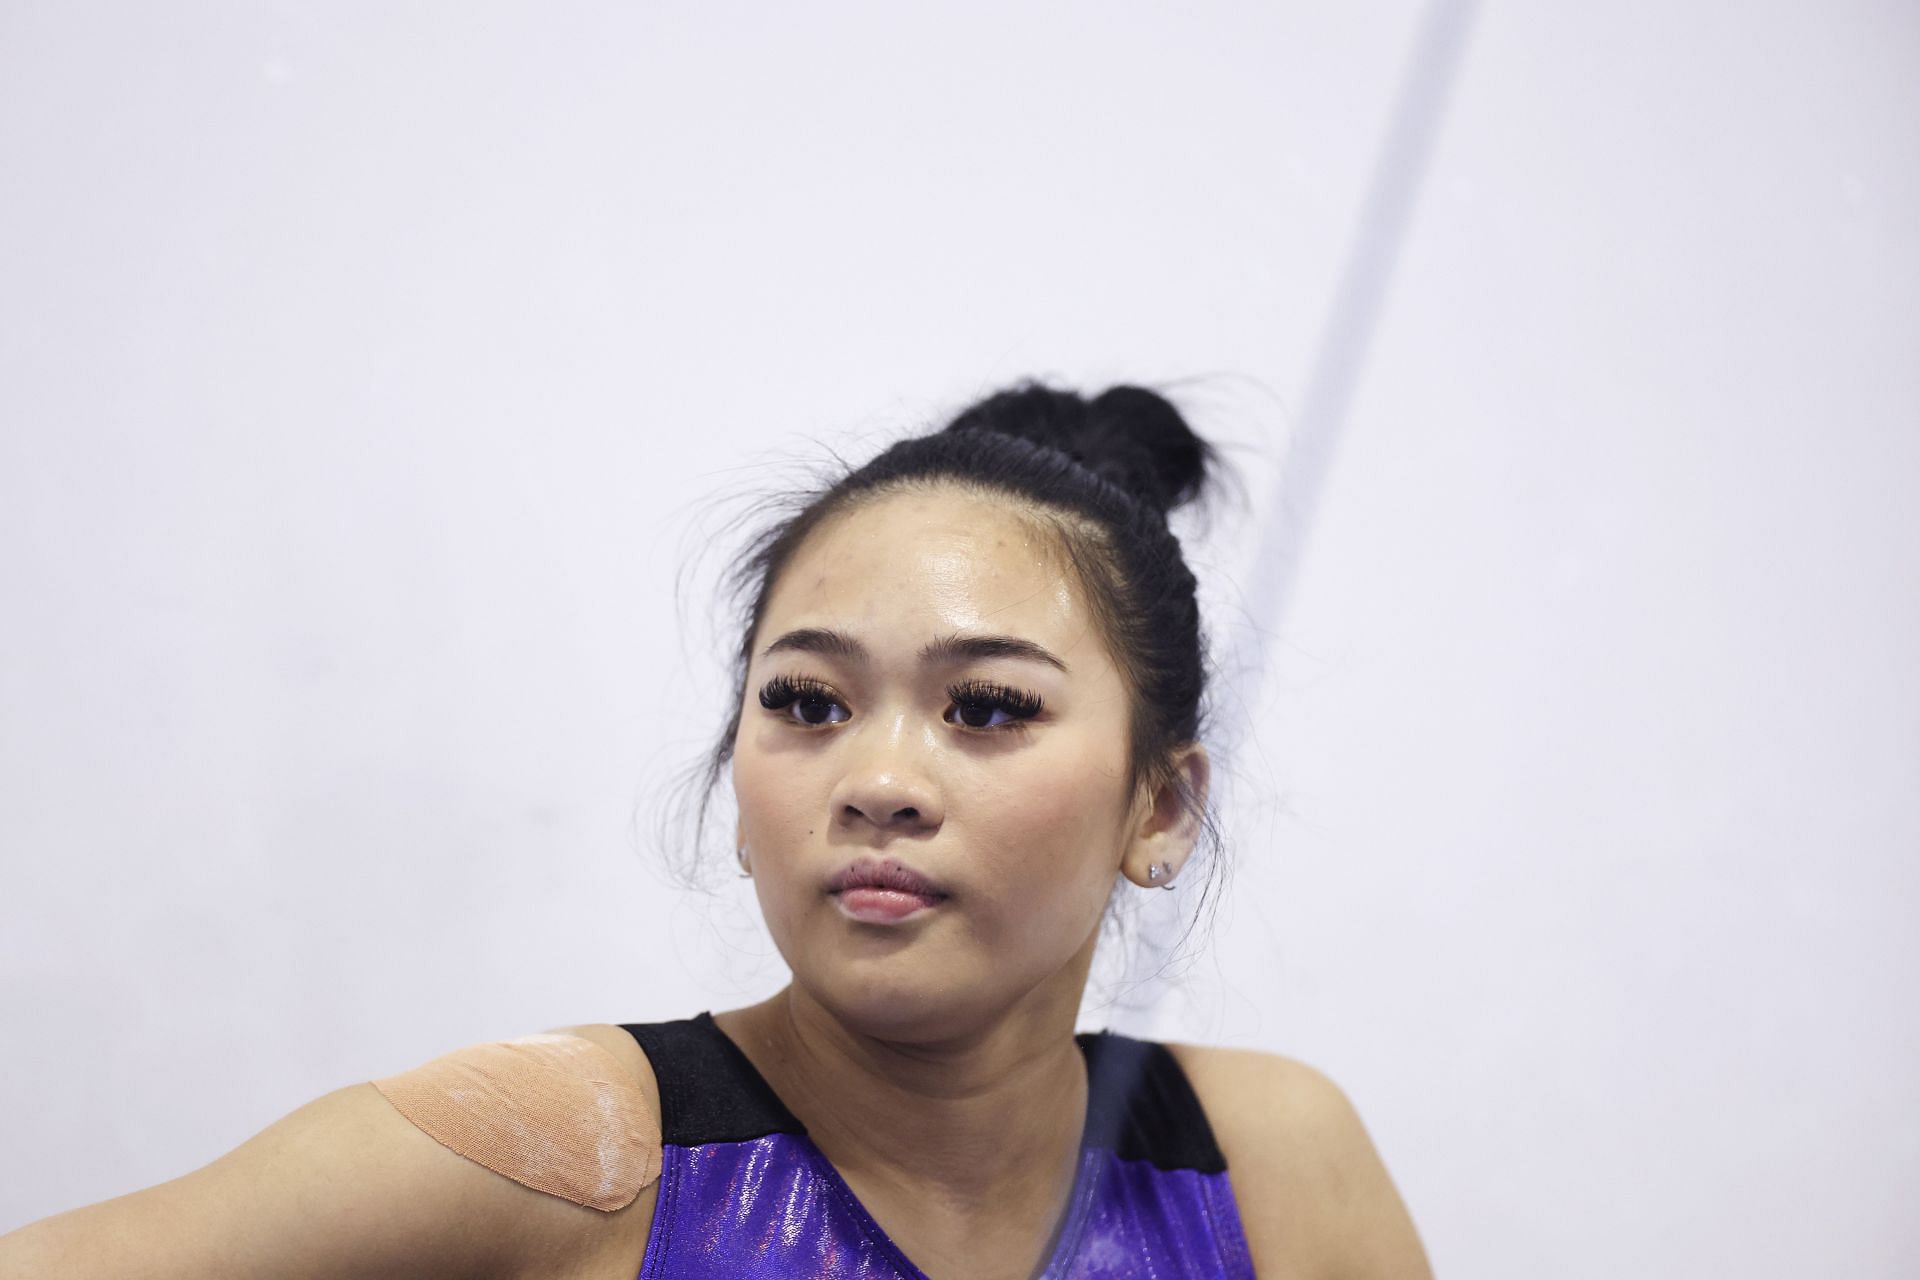 Sunisa Lee participates in a workout on February 05, 202,4 in Katy, Texas.